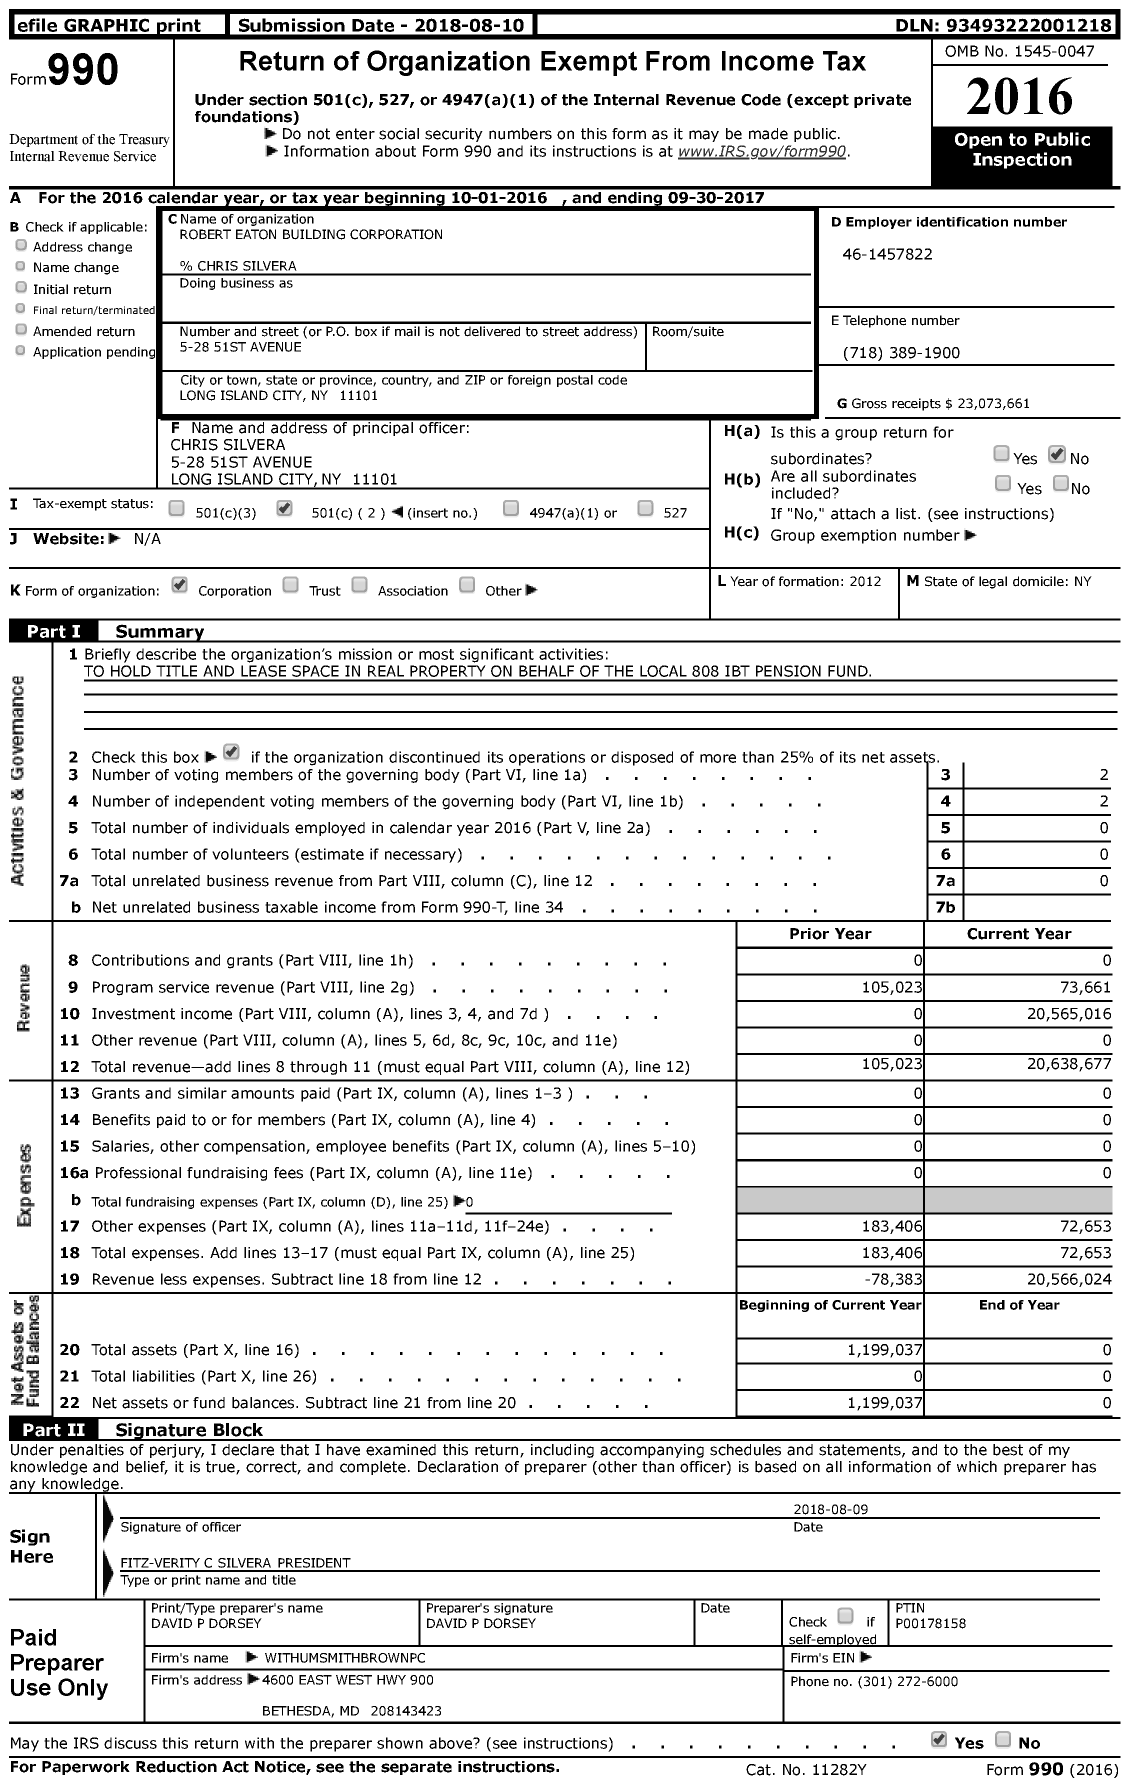 Image of first page of 2016 Form 990 for Robert Eaton Building Corporation